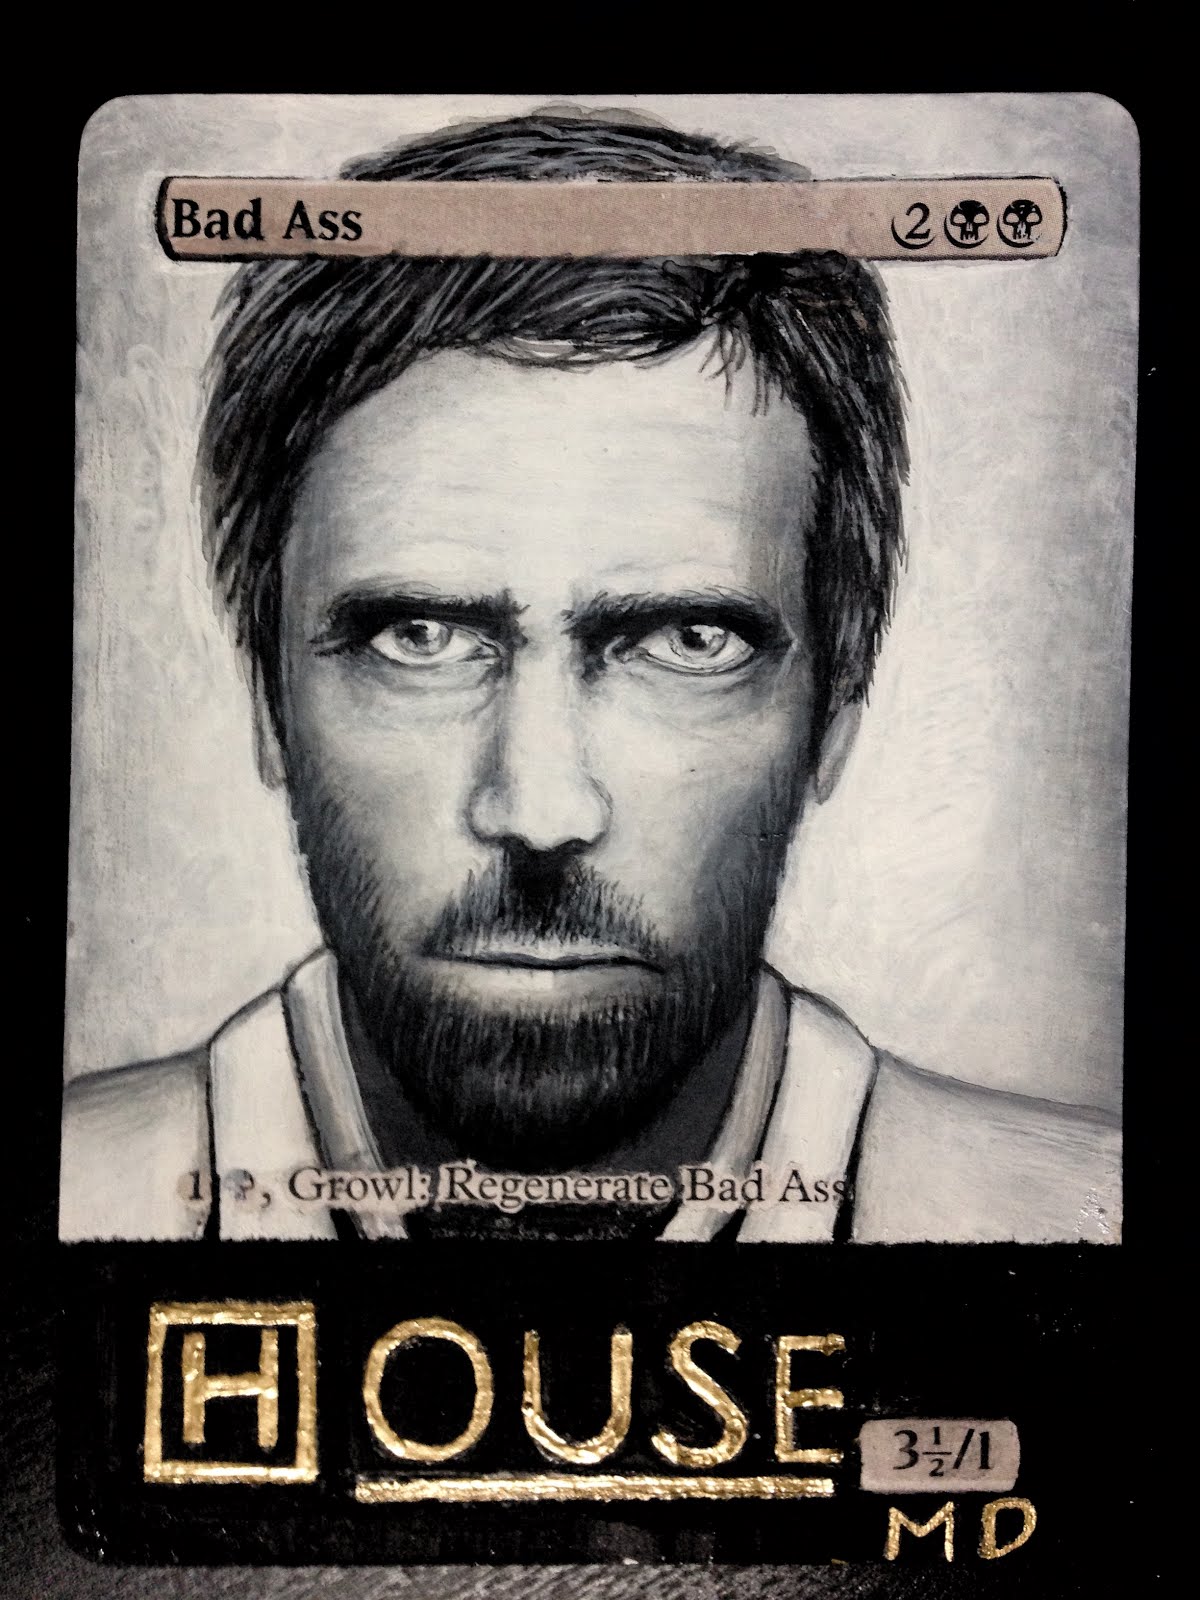 Dr. House as Bad Ass